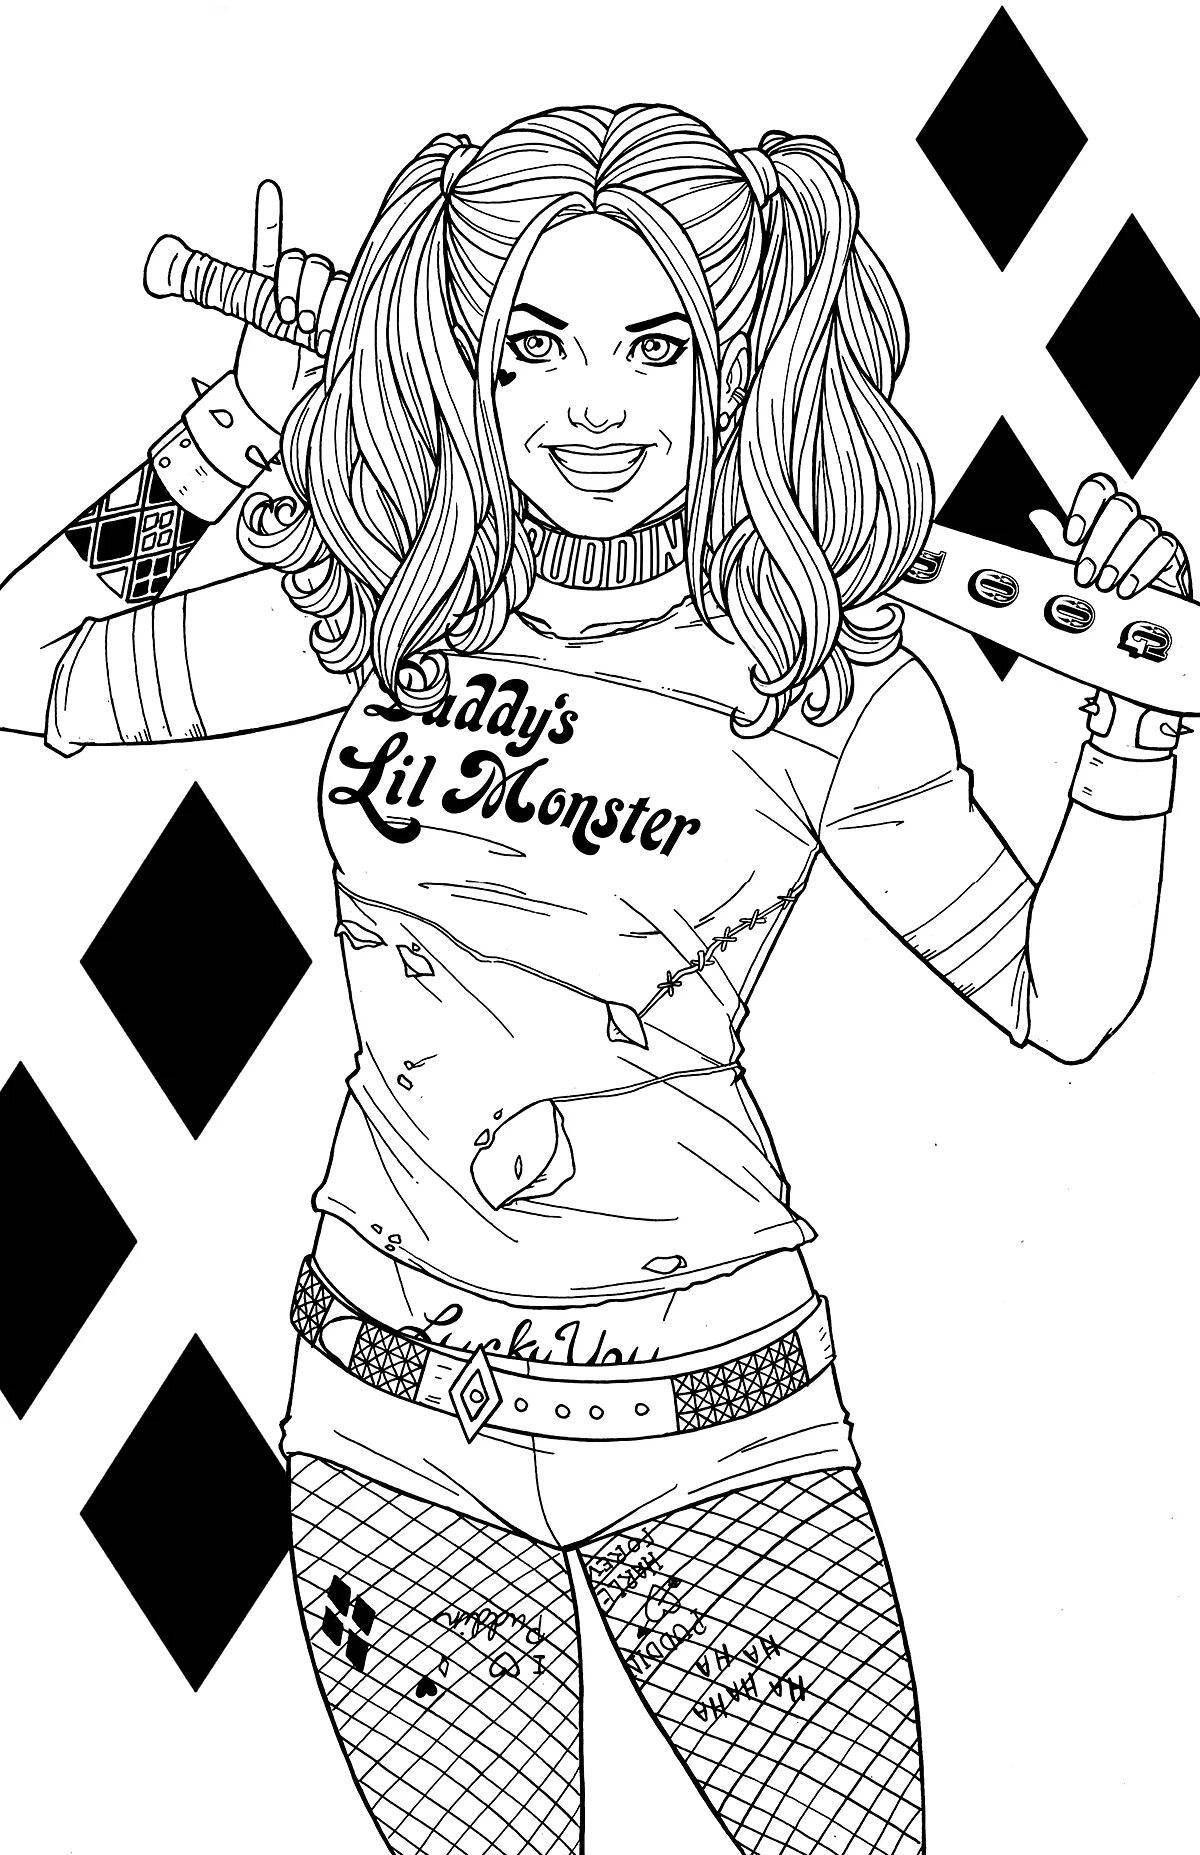 Irresistible harley quinn coloring book for girls